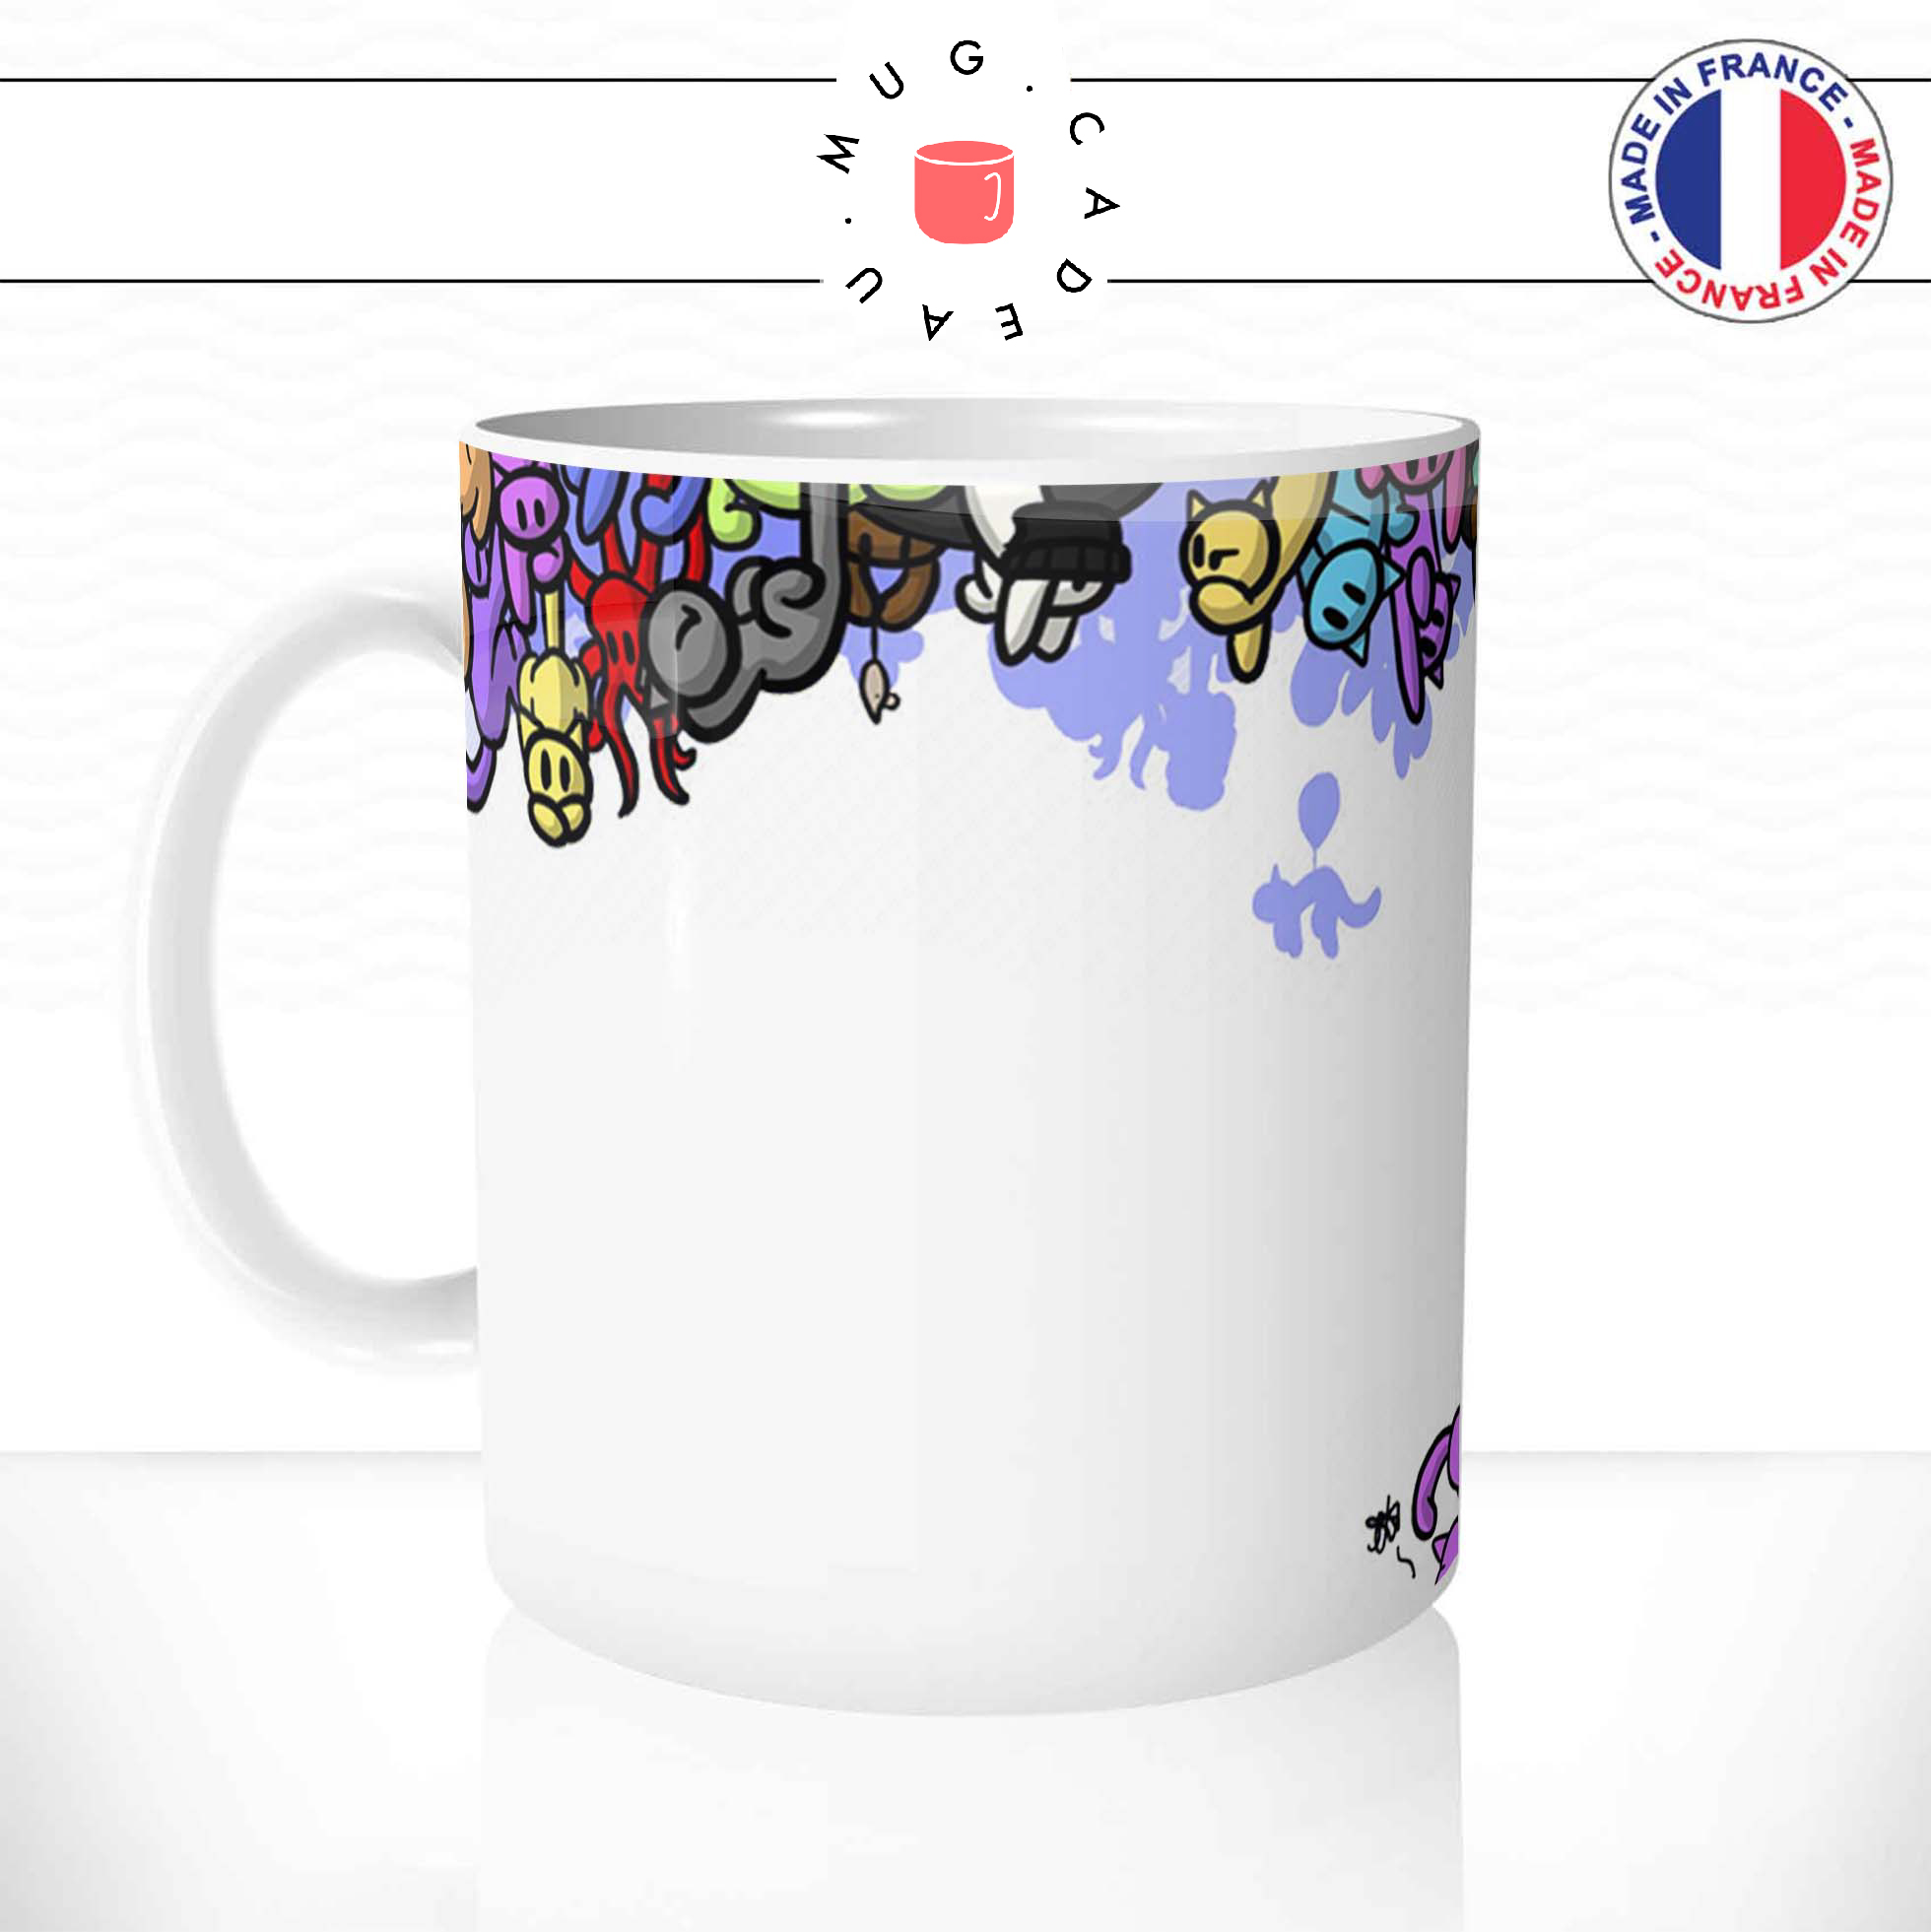 mug-tasse-ref9-chat-tombe-couleurs-drole-cafe-the-tasses-mugs-personnalise-anse-gauche